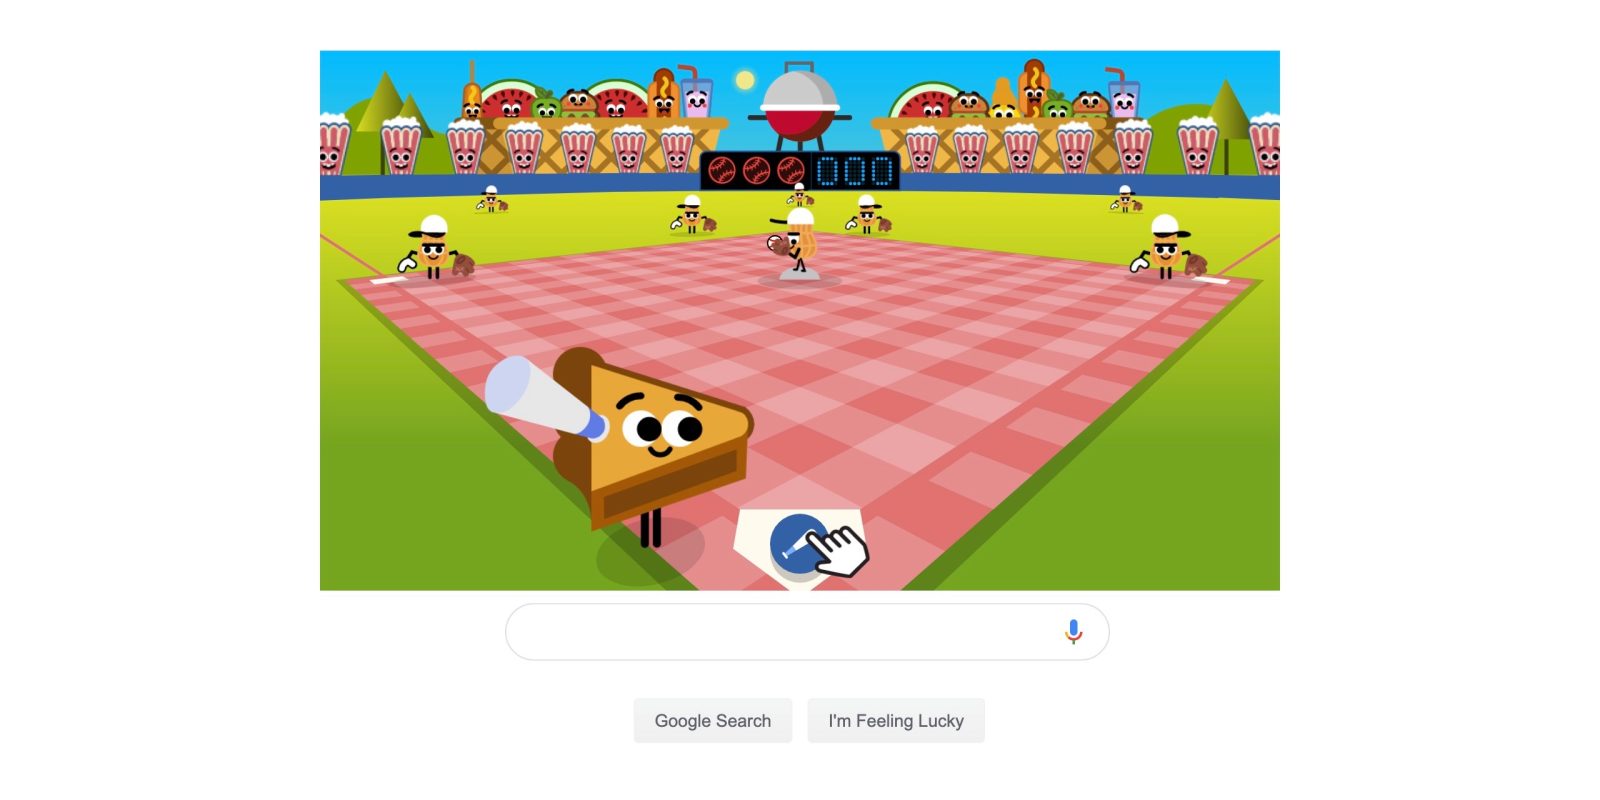 Google’s ‘Fourth of July’ Doodle is a BBQthemed baseball game LaptrinhX